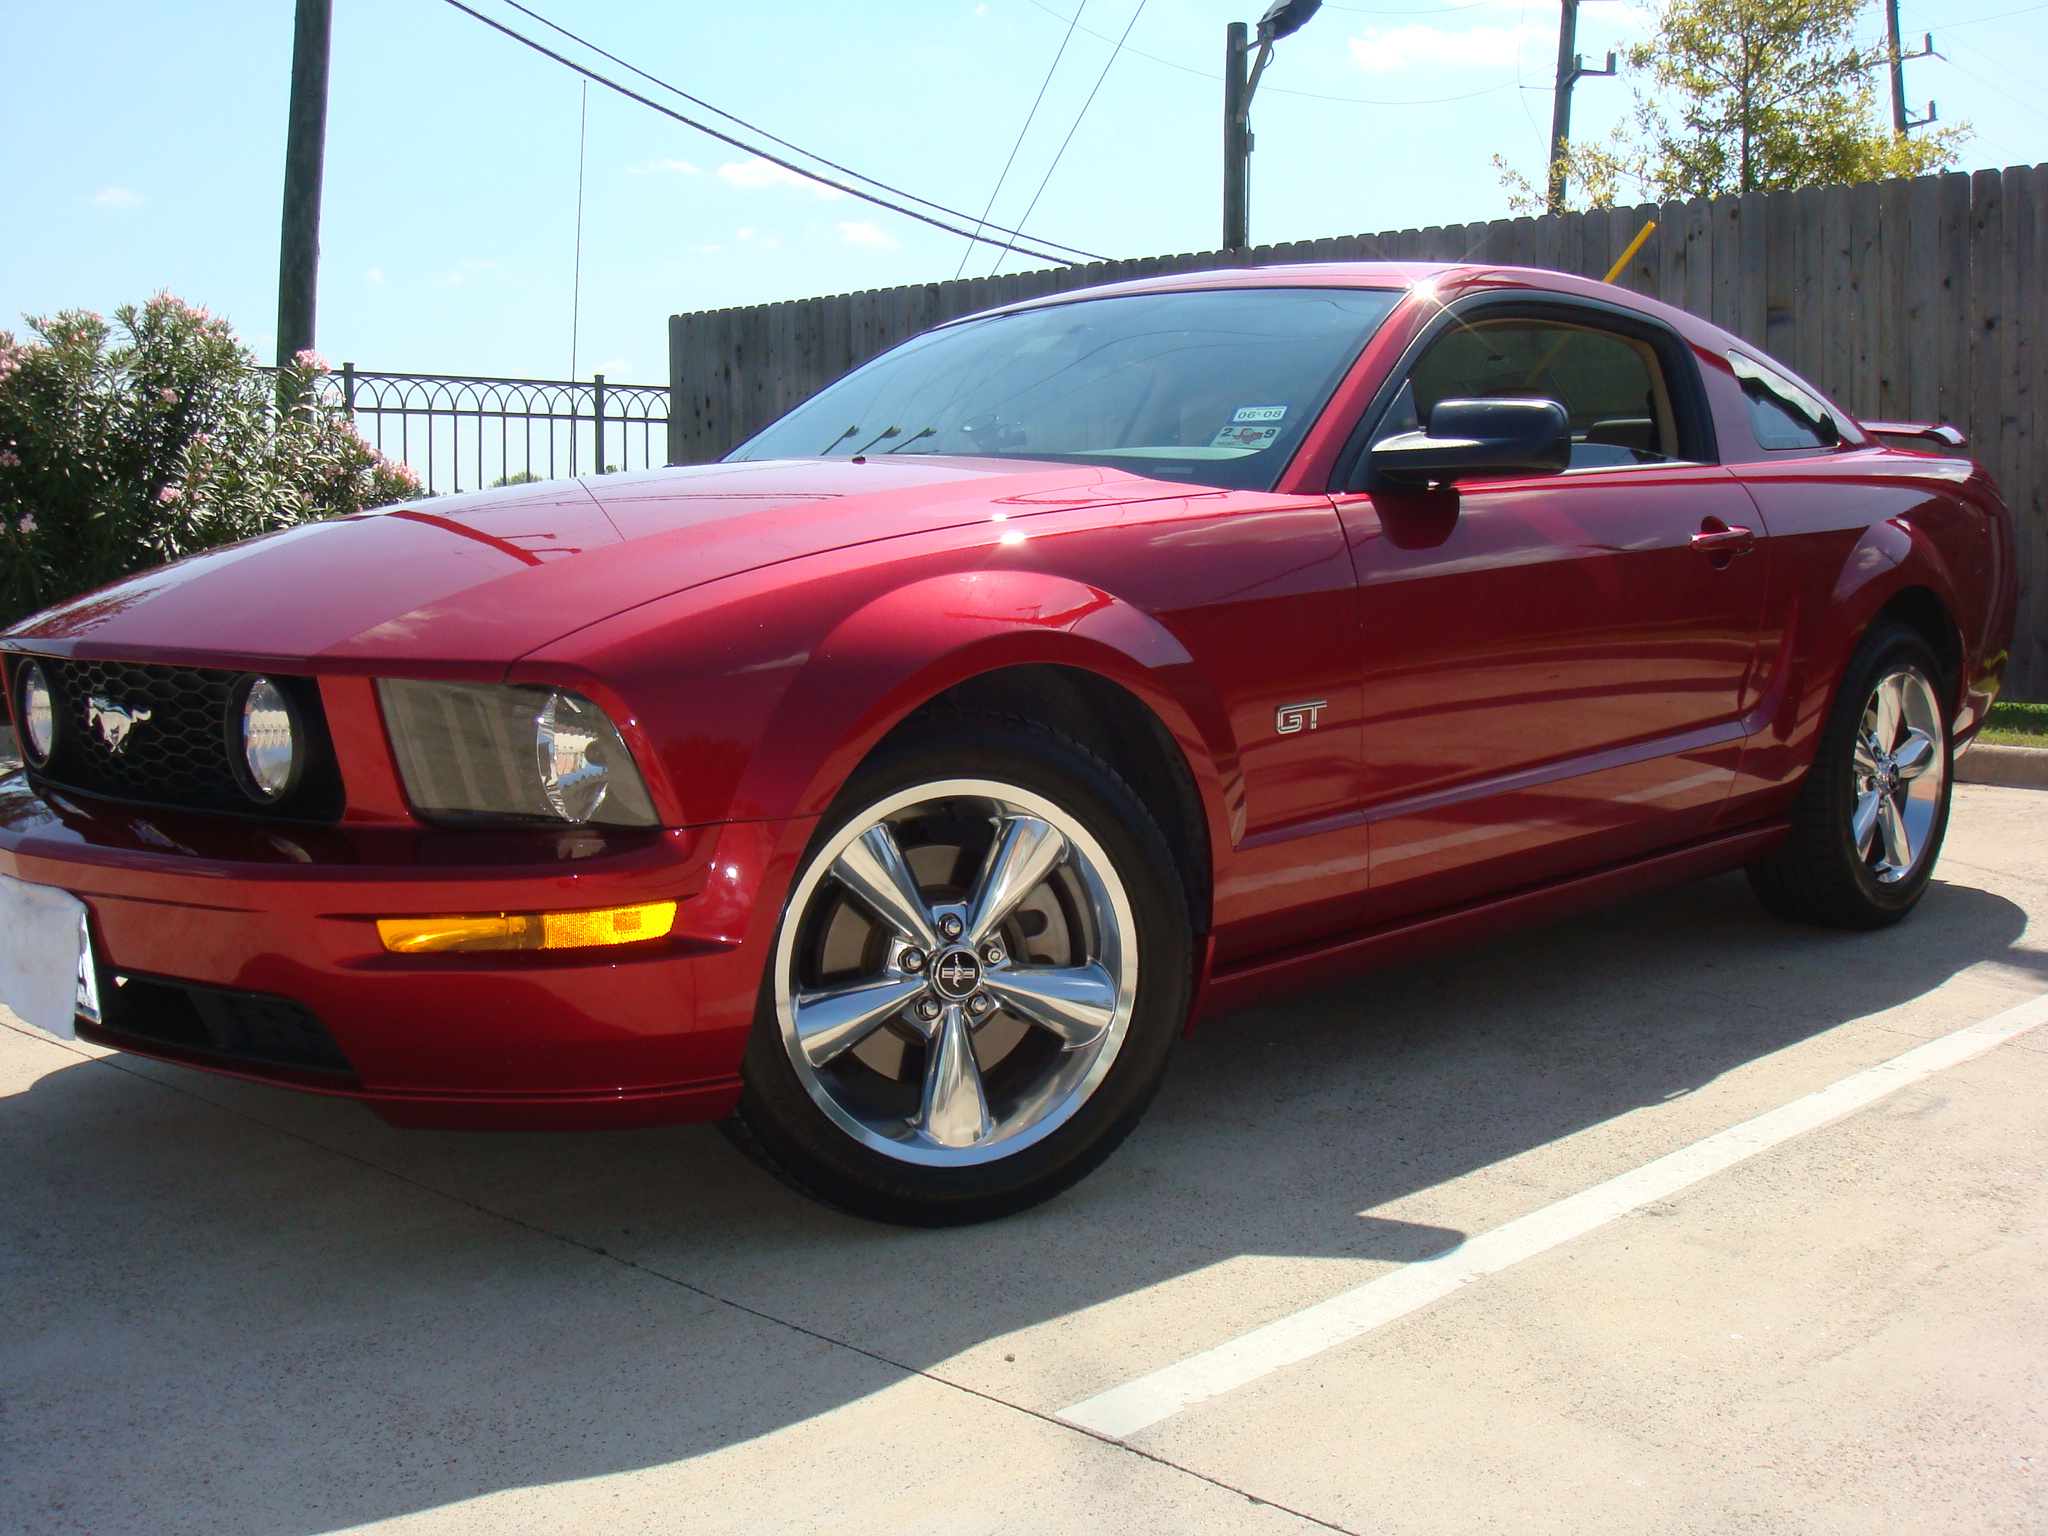 2006 Ford mustang gt quarter mile time #6